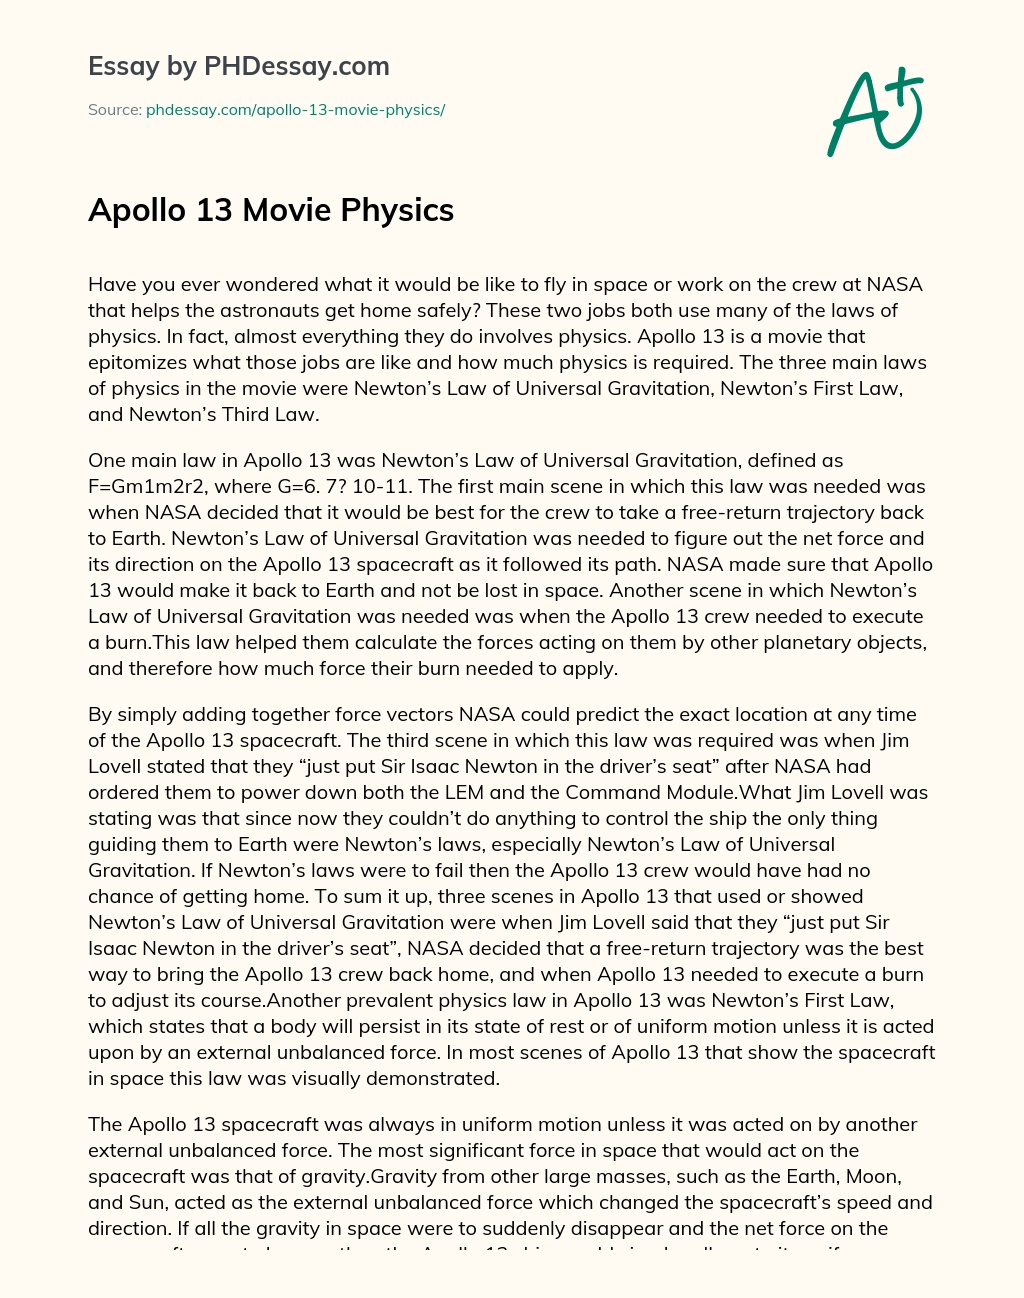 The Importance of Physics in Space Exploration: Analyzing Newton’s Laws in Apollo 13 essay